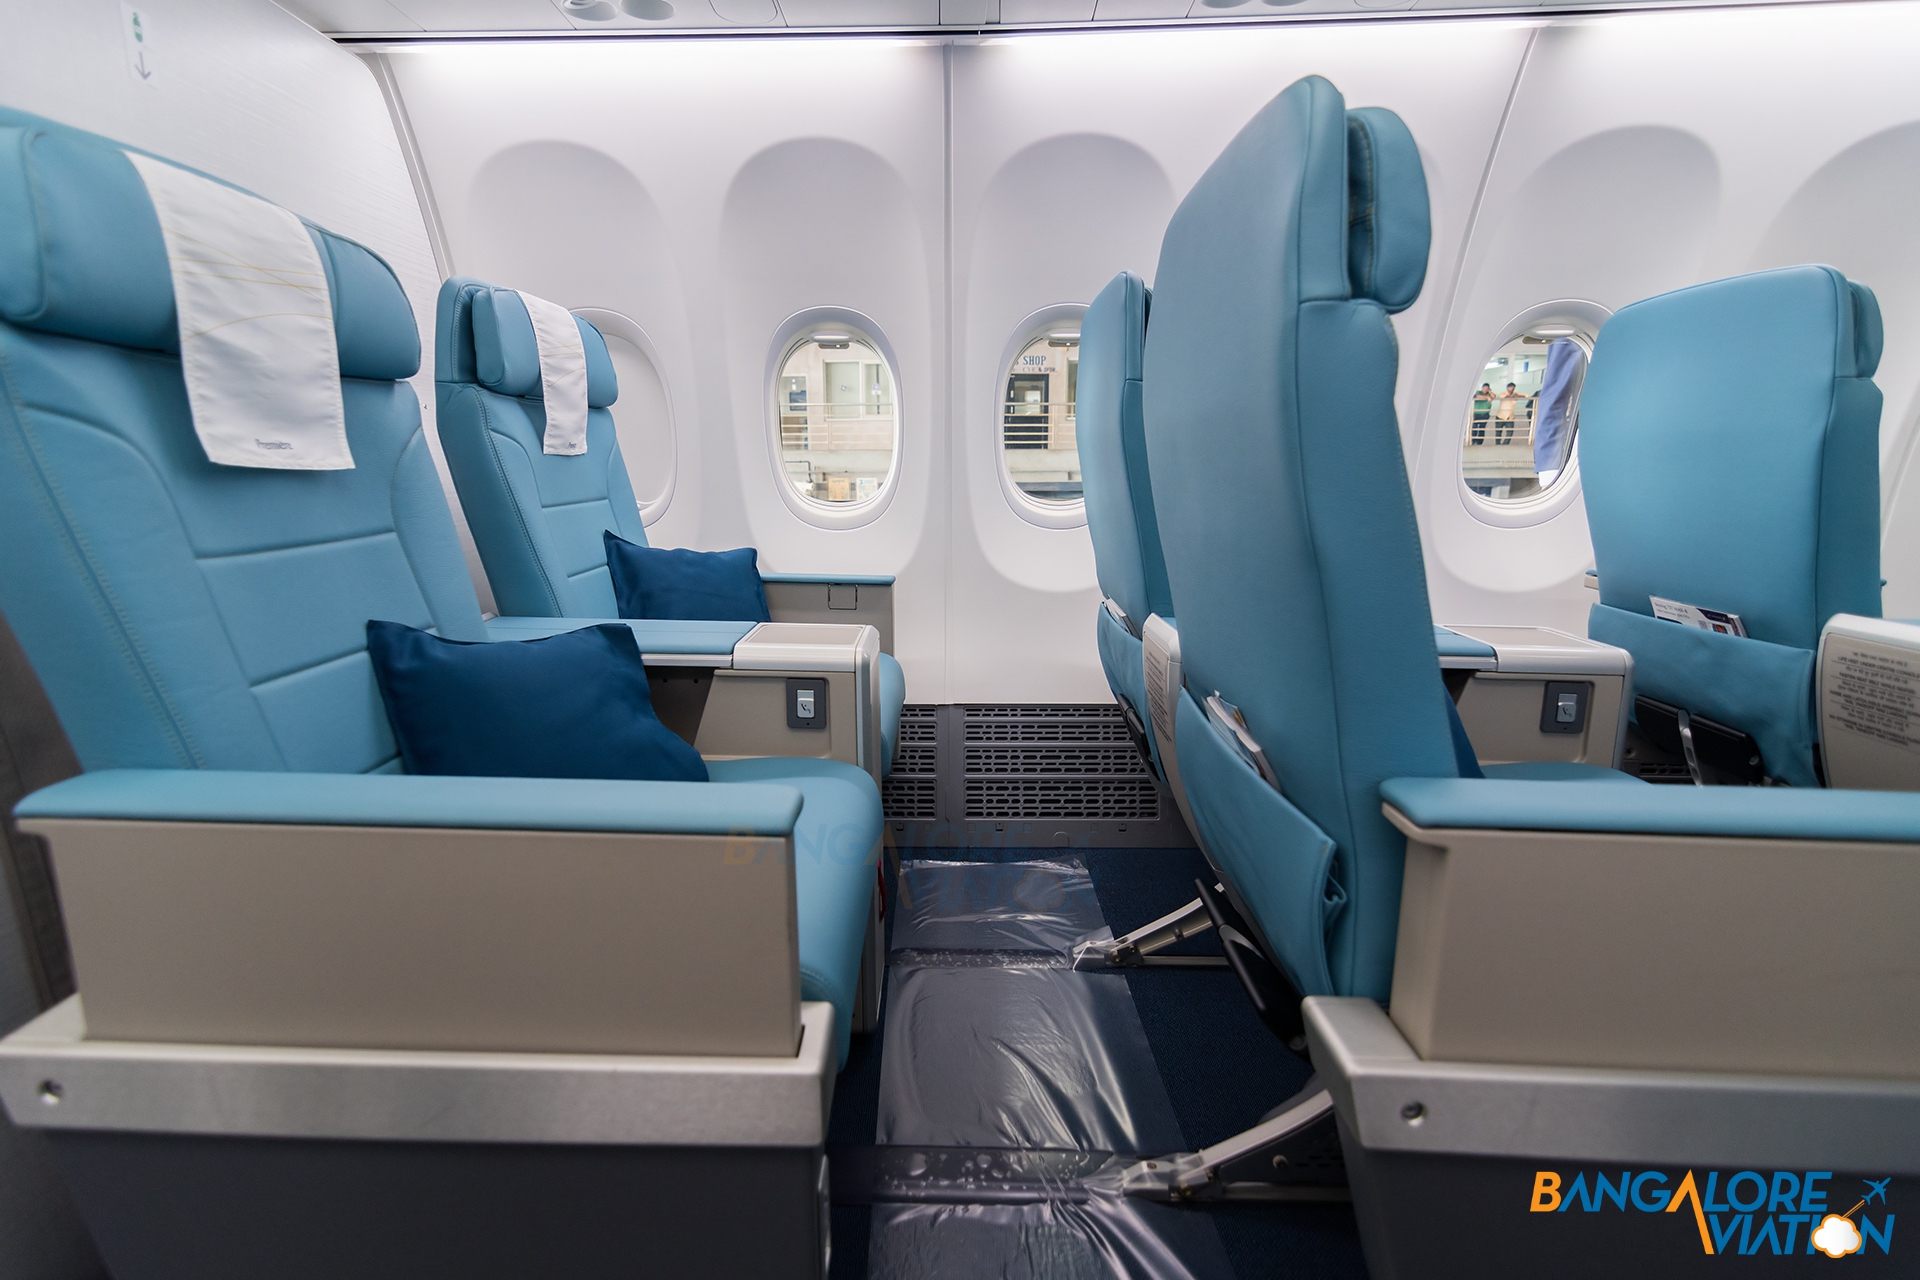 The New Jet Airways Boeing 737 Max Exclusive Cabin Photos